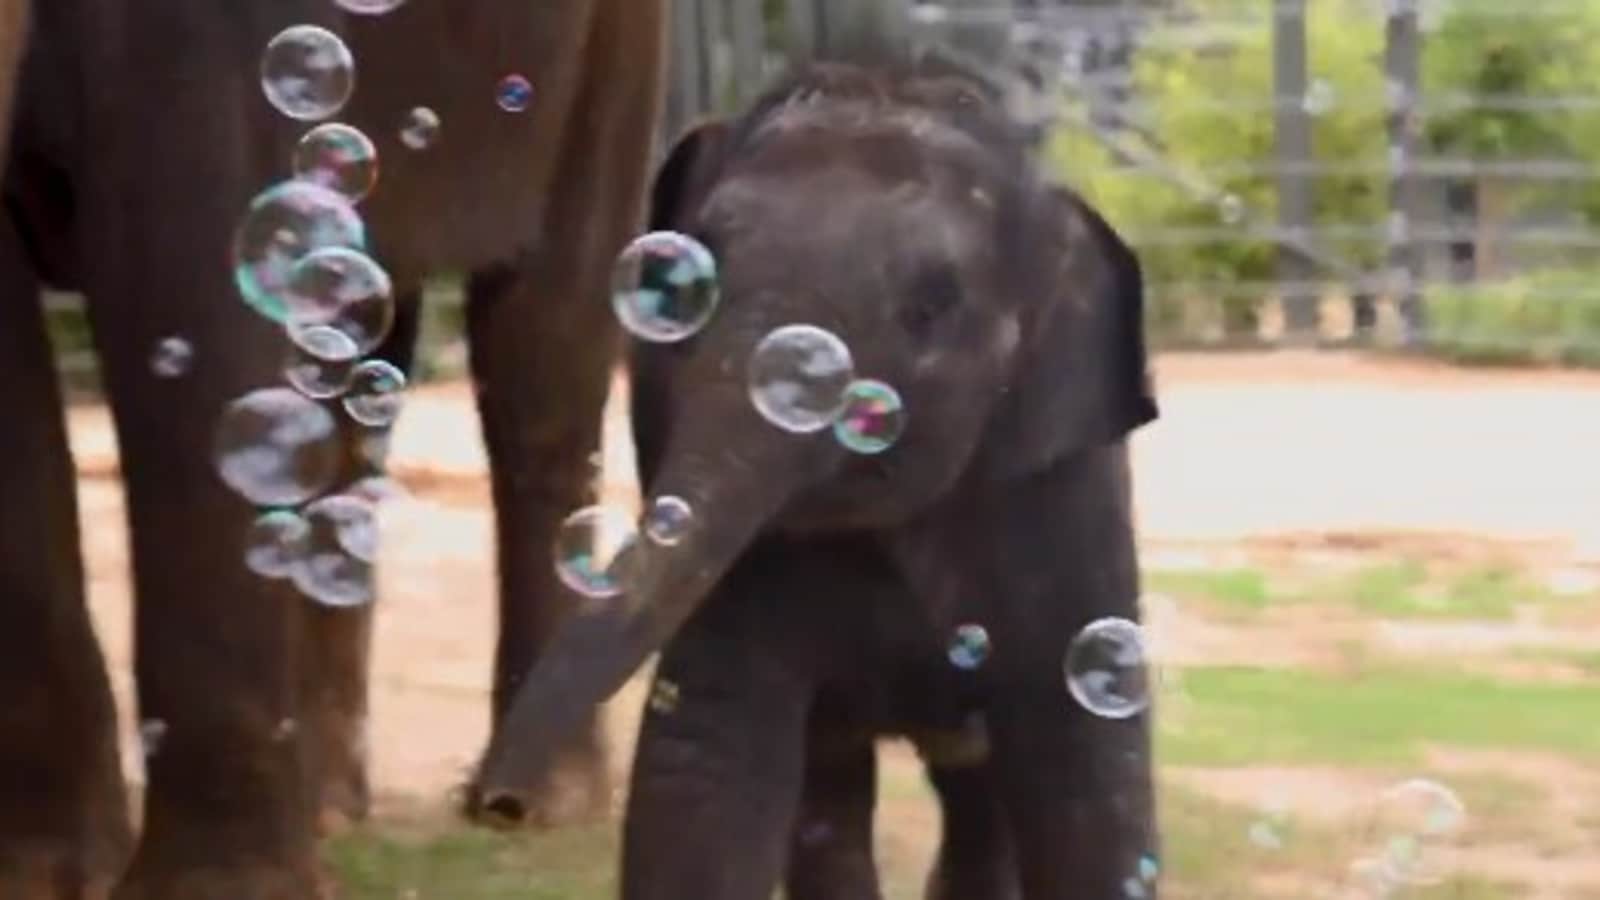 Baby elephant plays with bubbles, tries eating them. Watch happy video